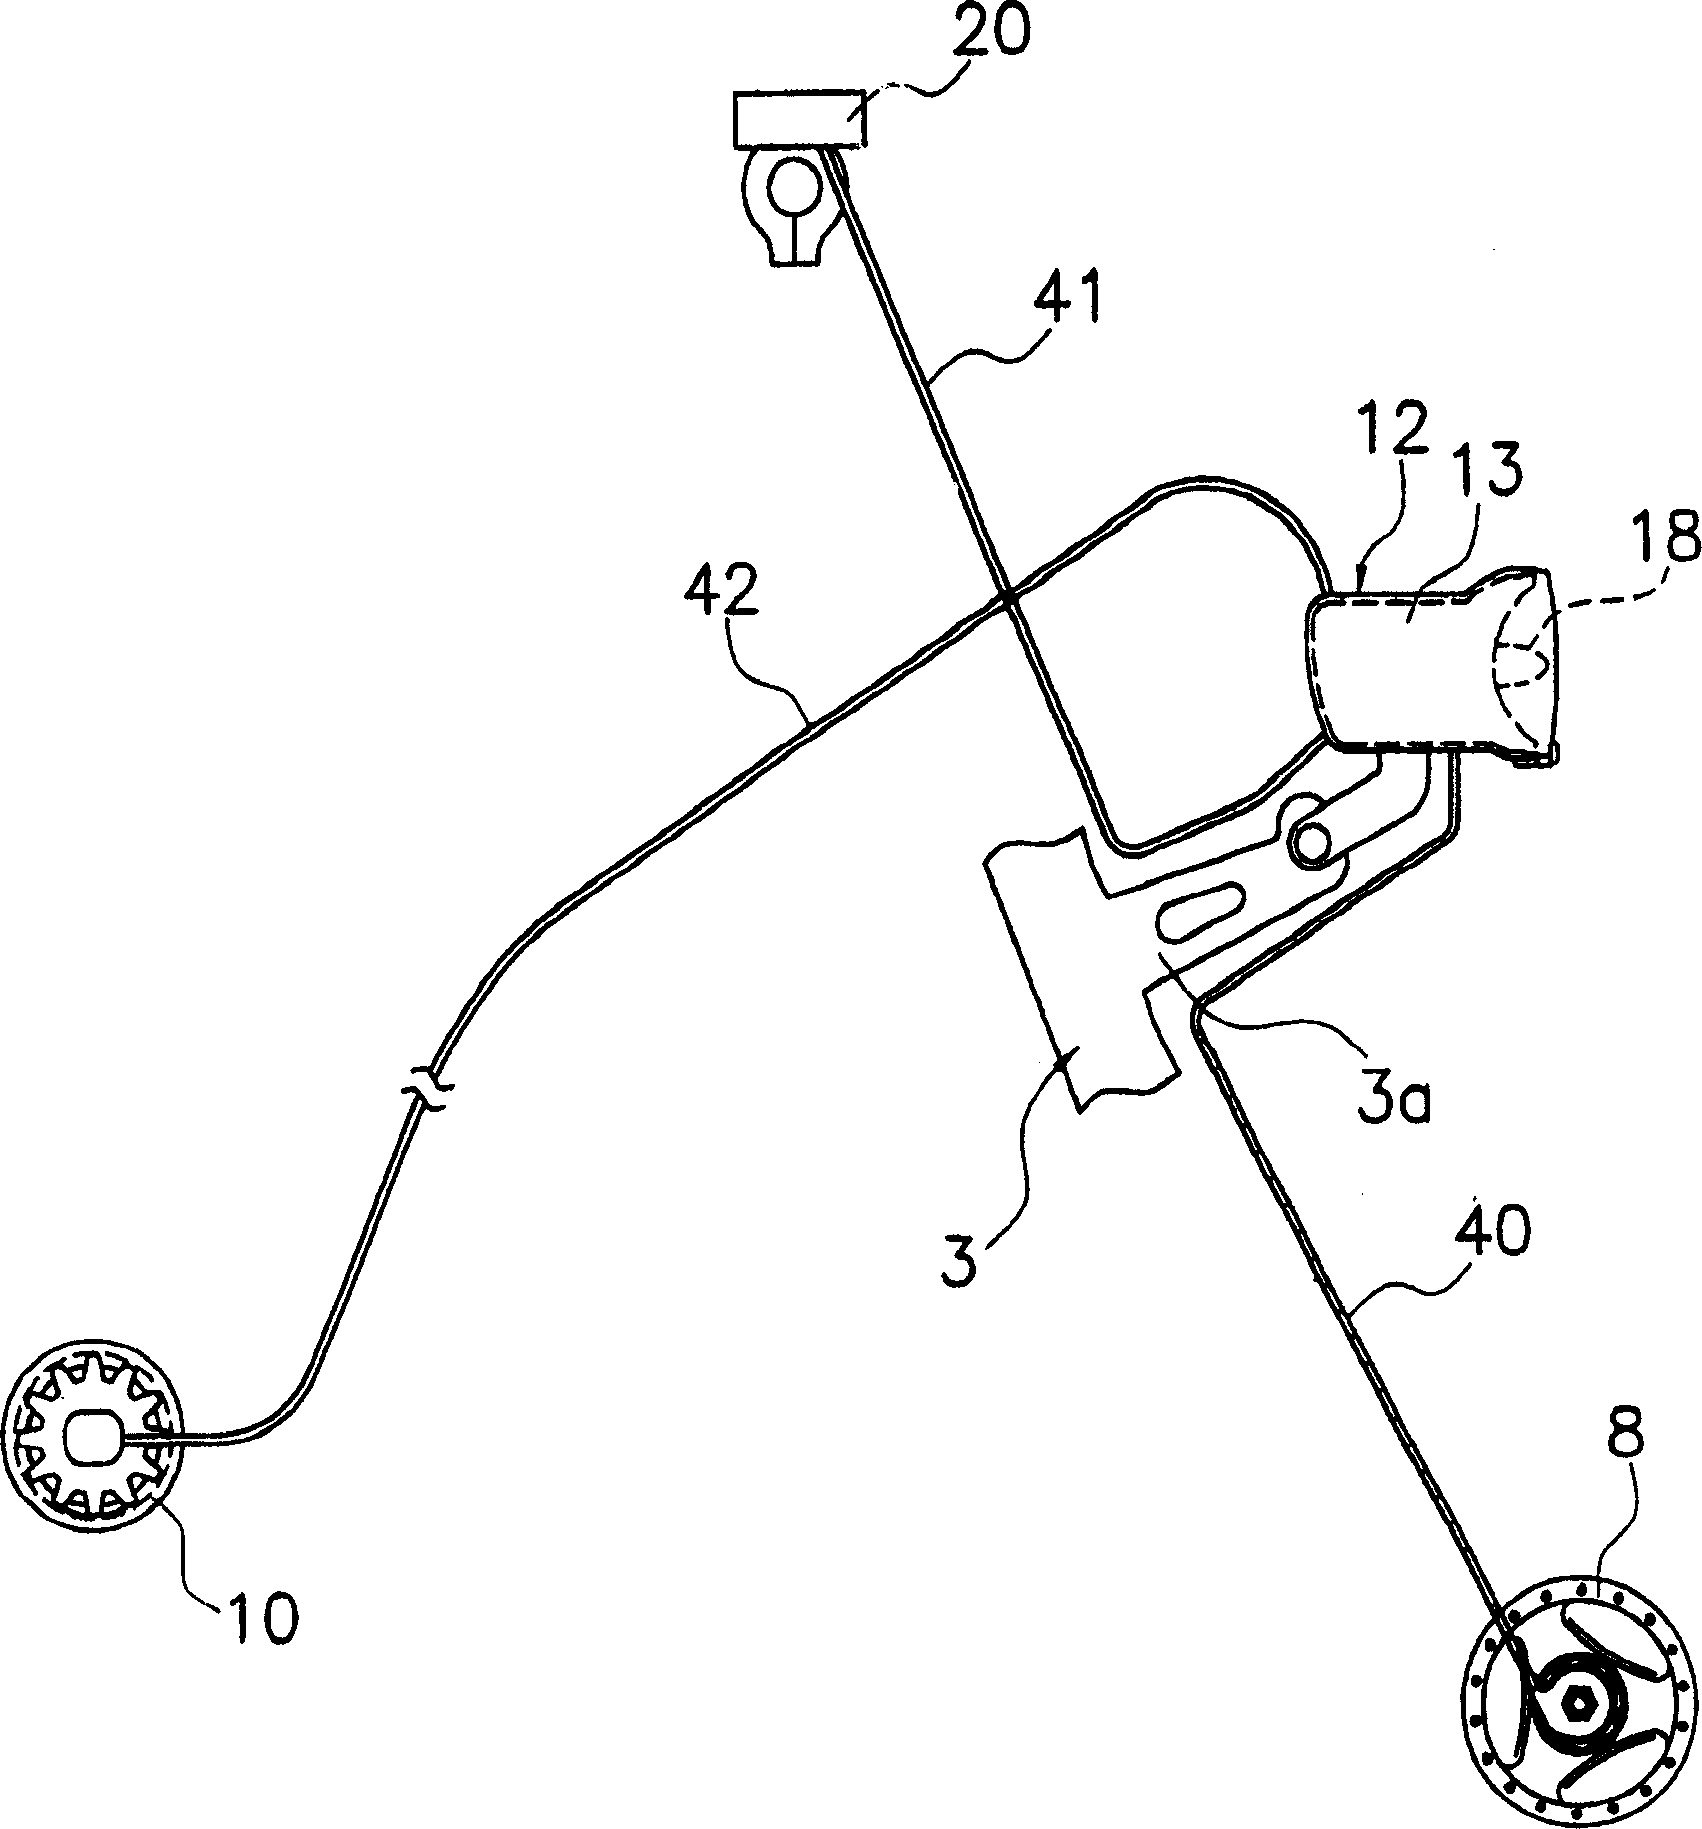 Power supply device for bicycle